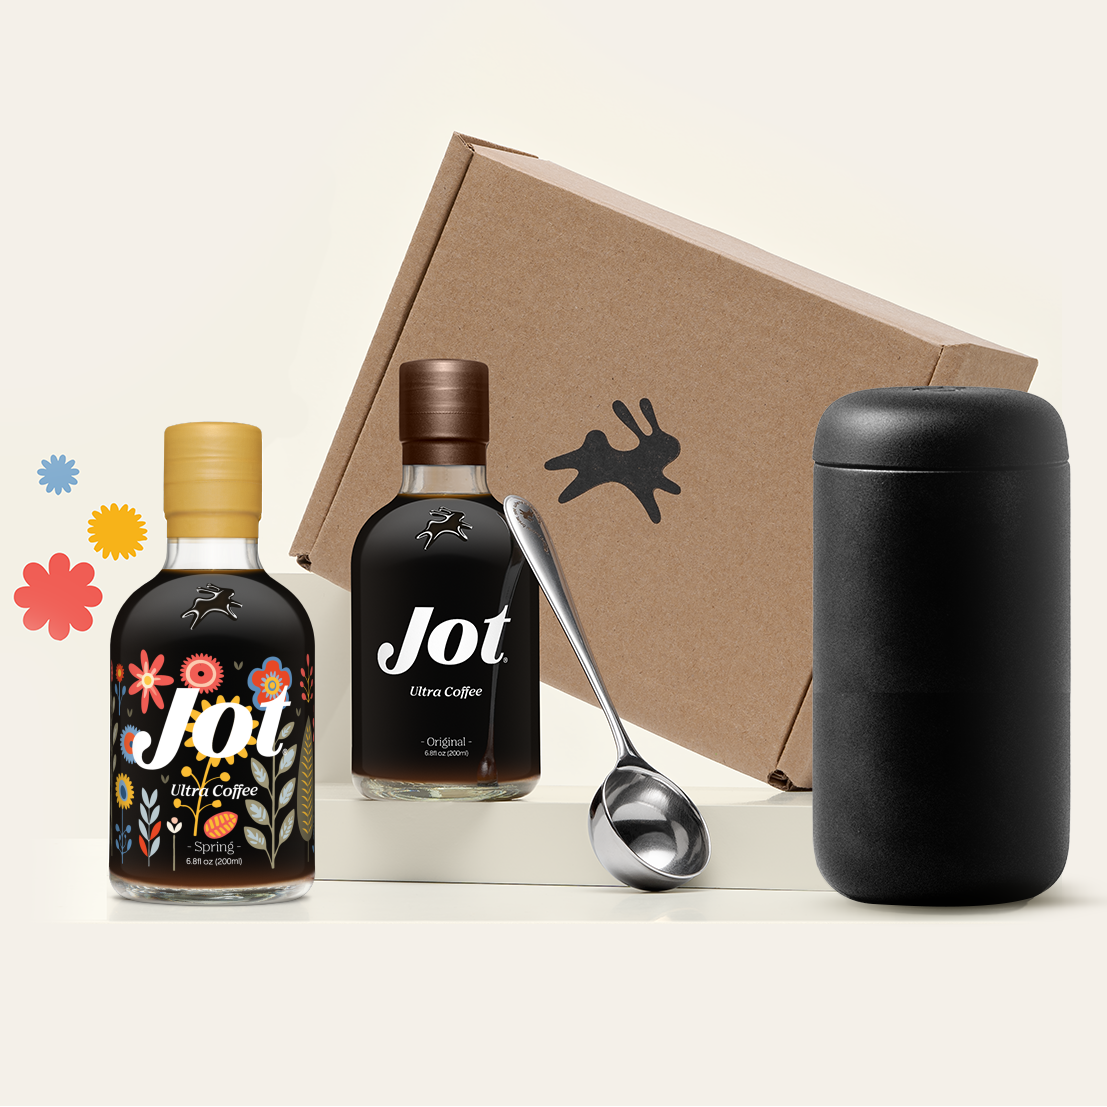 Two bottles of Jot coffee concentrate, a spoon, and a travel mug with cardboard box and decorative flowers.